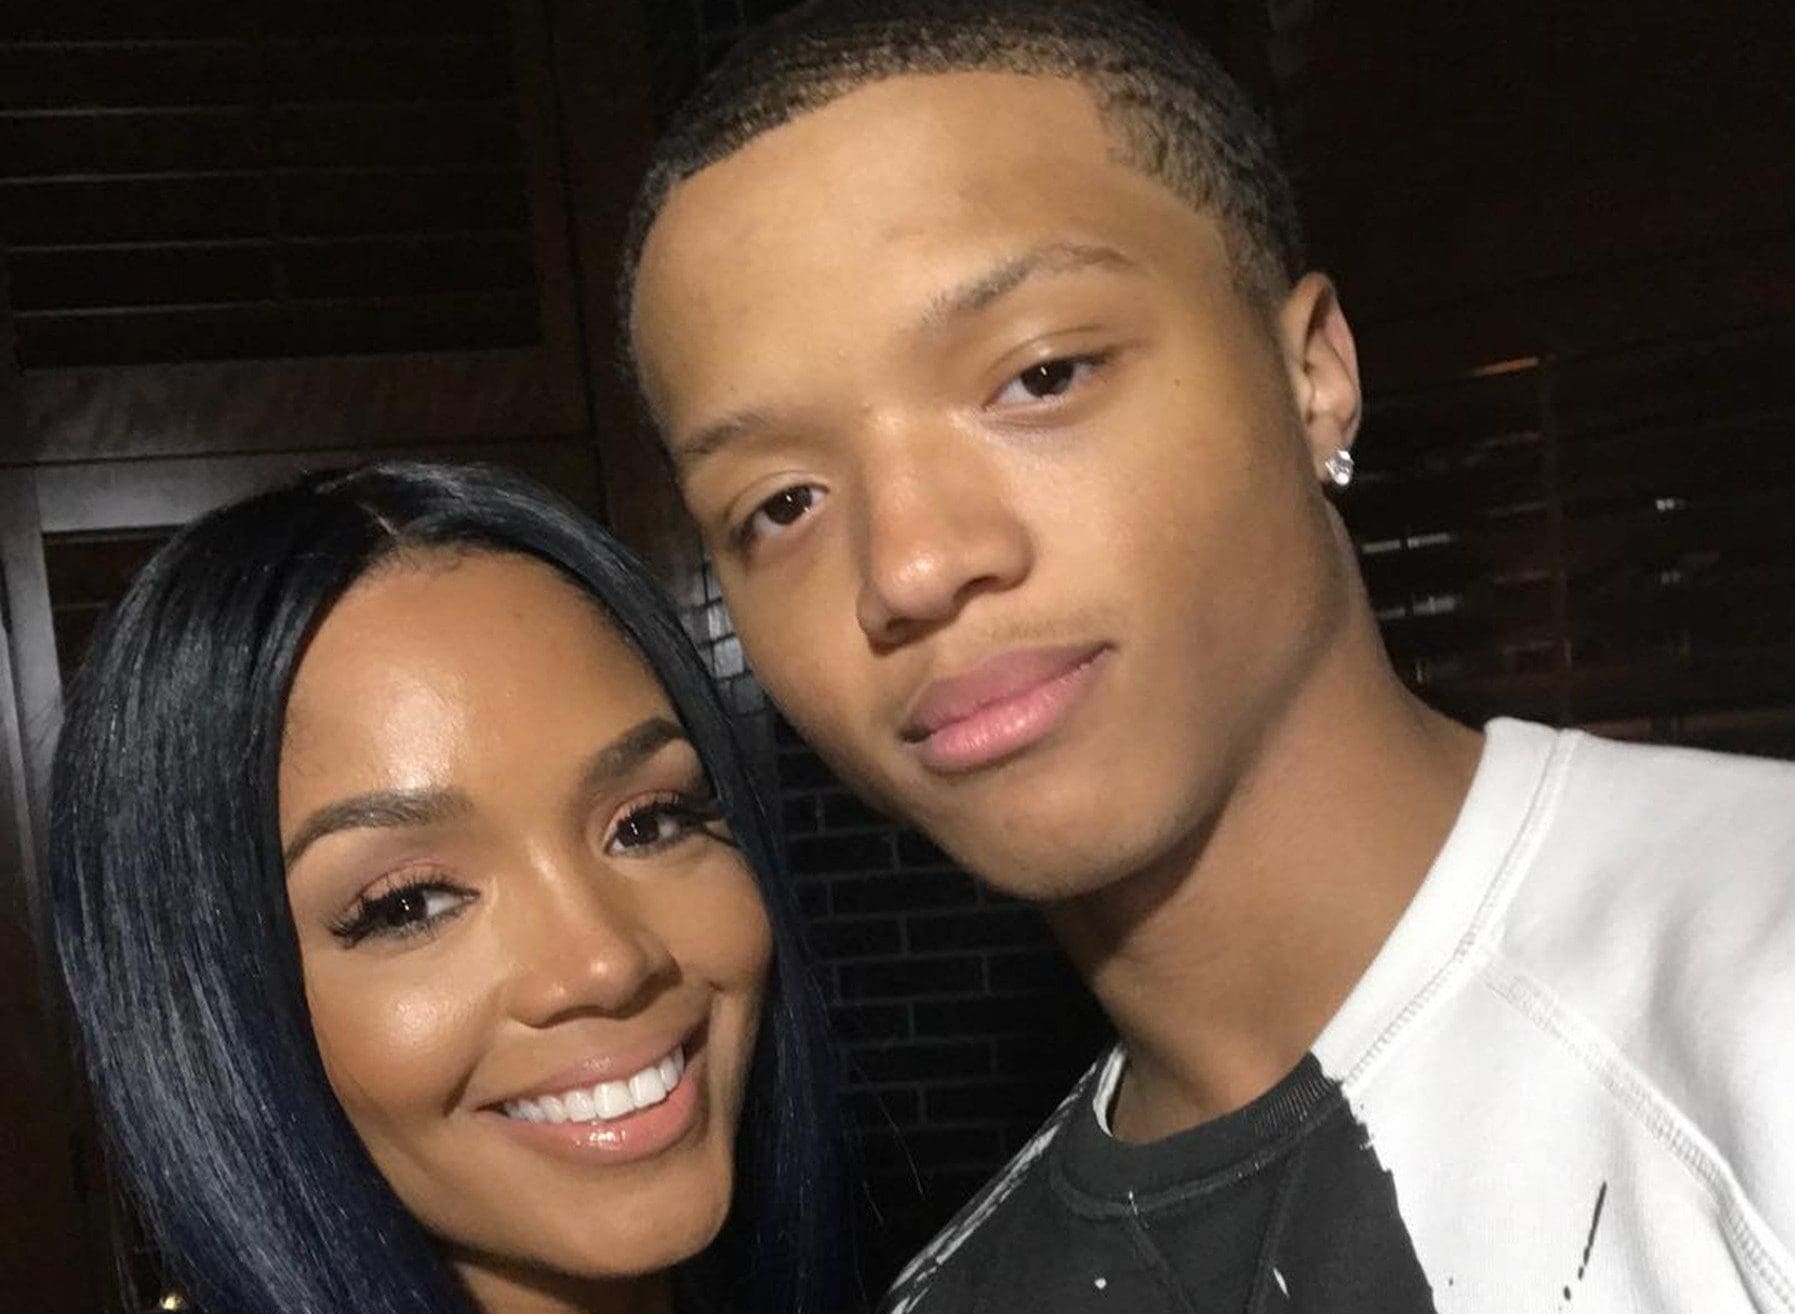 Rasheeda Frost Is Celebrating The Birthday Of Her Firstborn, Ky Frost - See Their Video Together